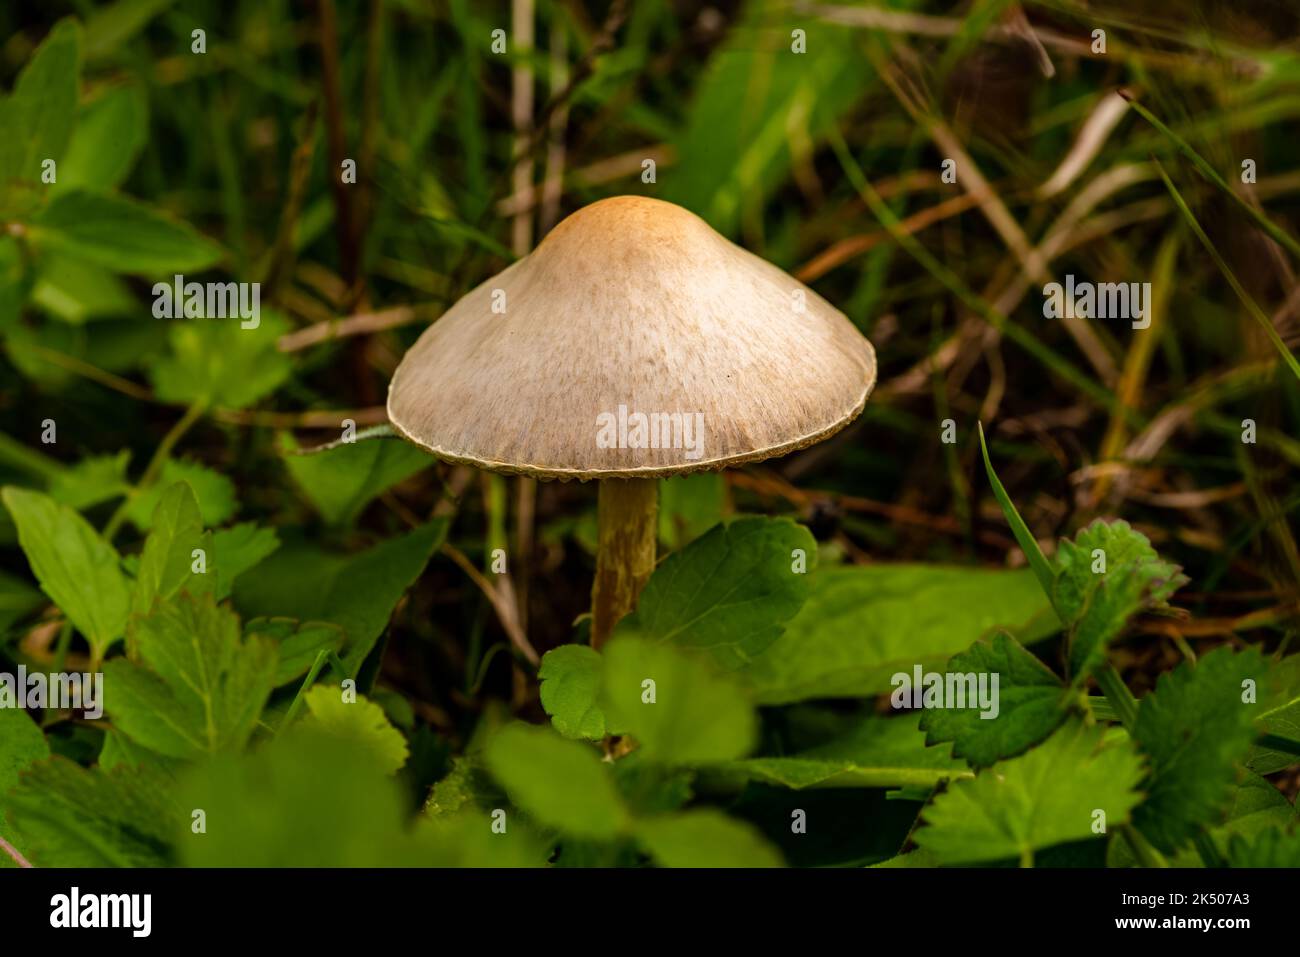 A closeup shot of a single Psathyrella conopilus mushroom in a forest Stock Photo